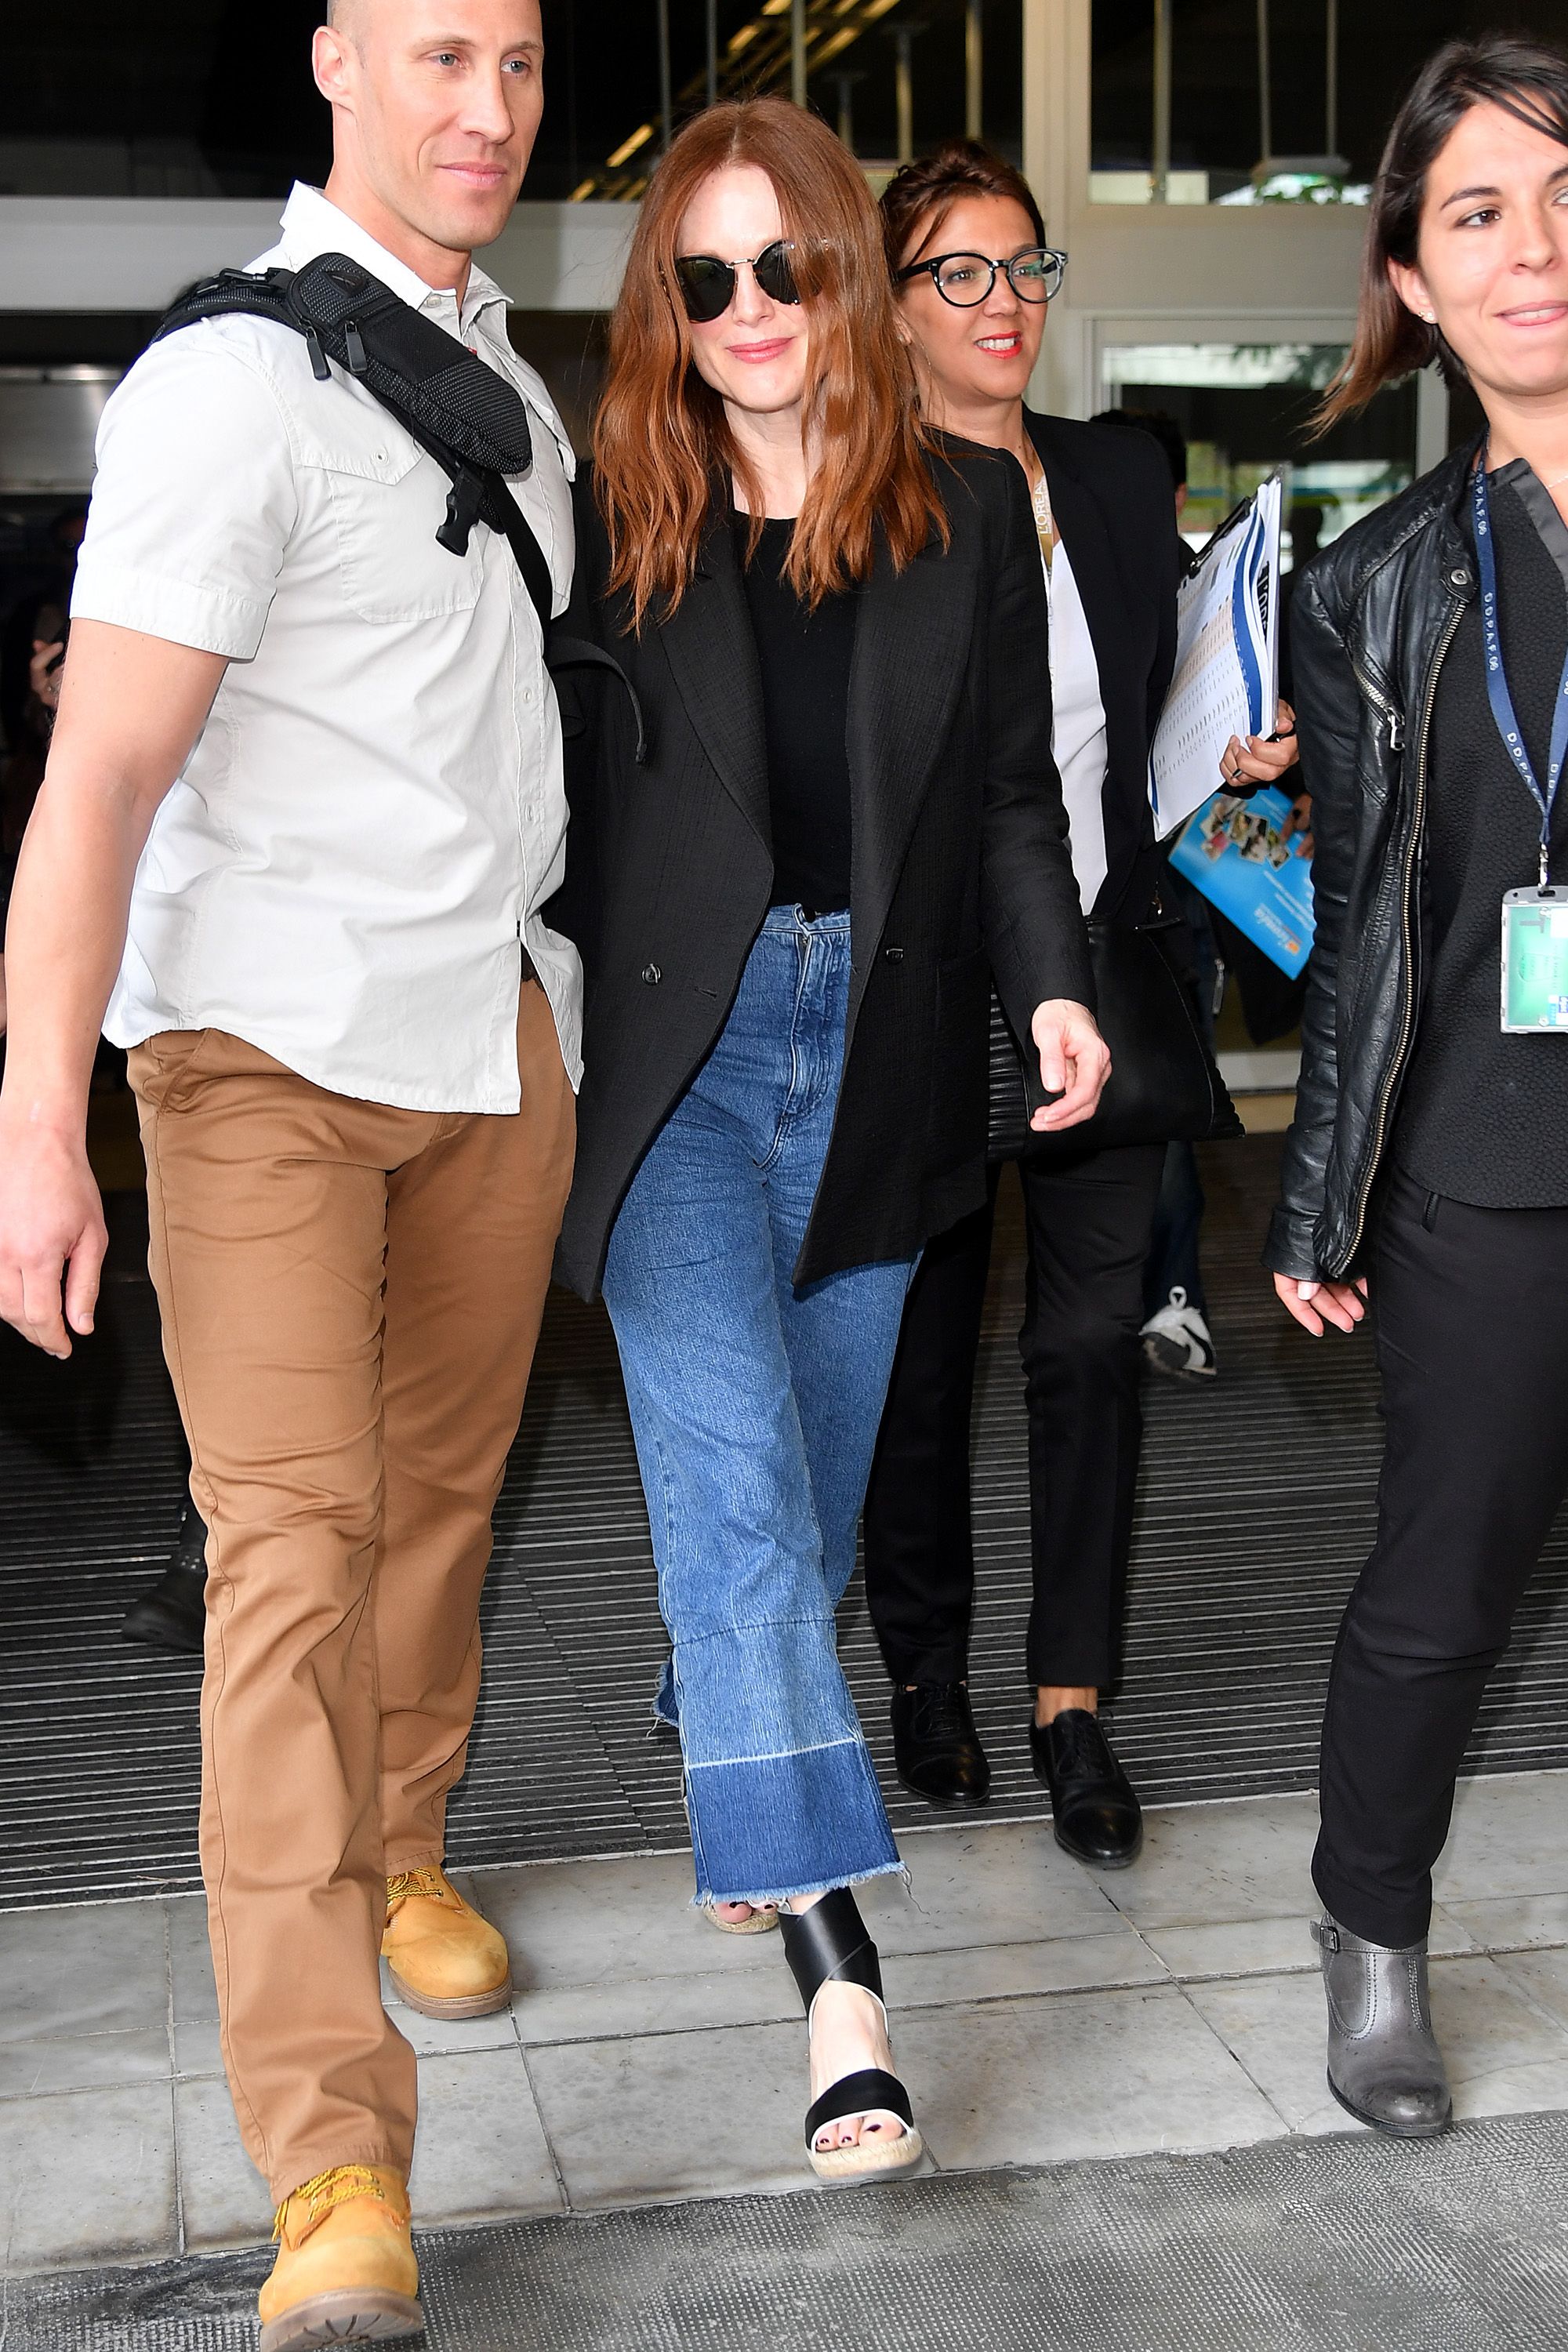 Airport style: what the stars are wearing on the plane to Cannes